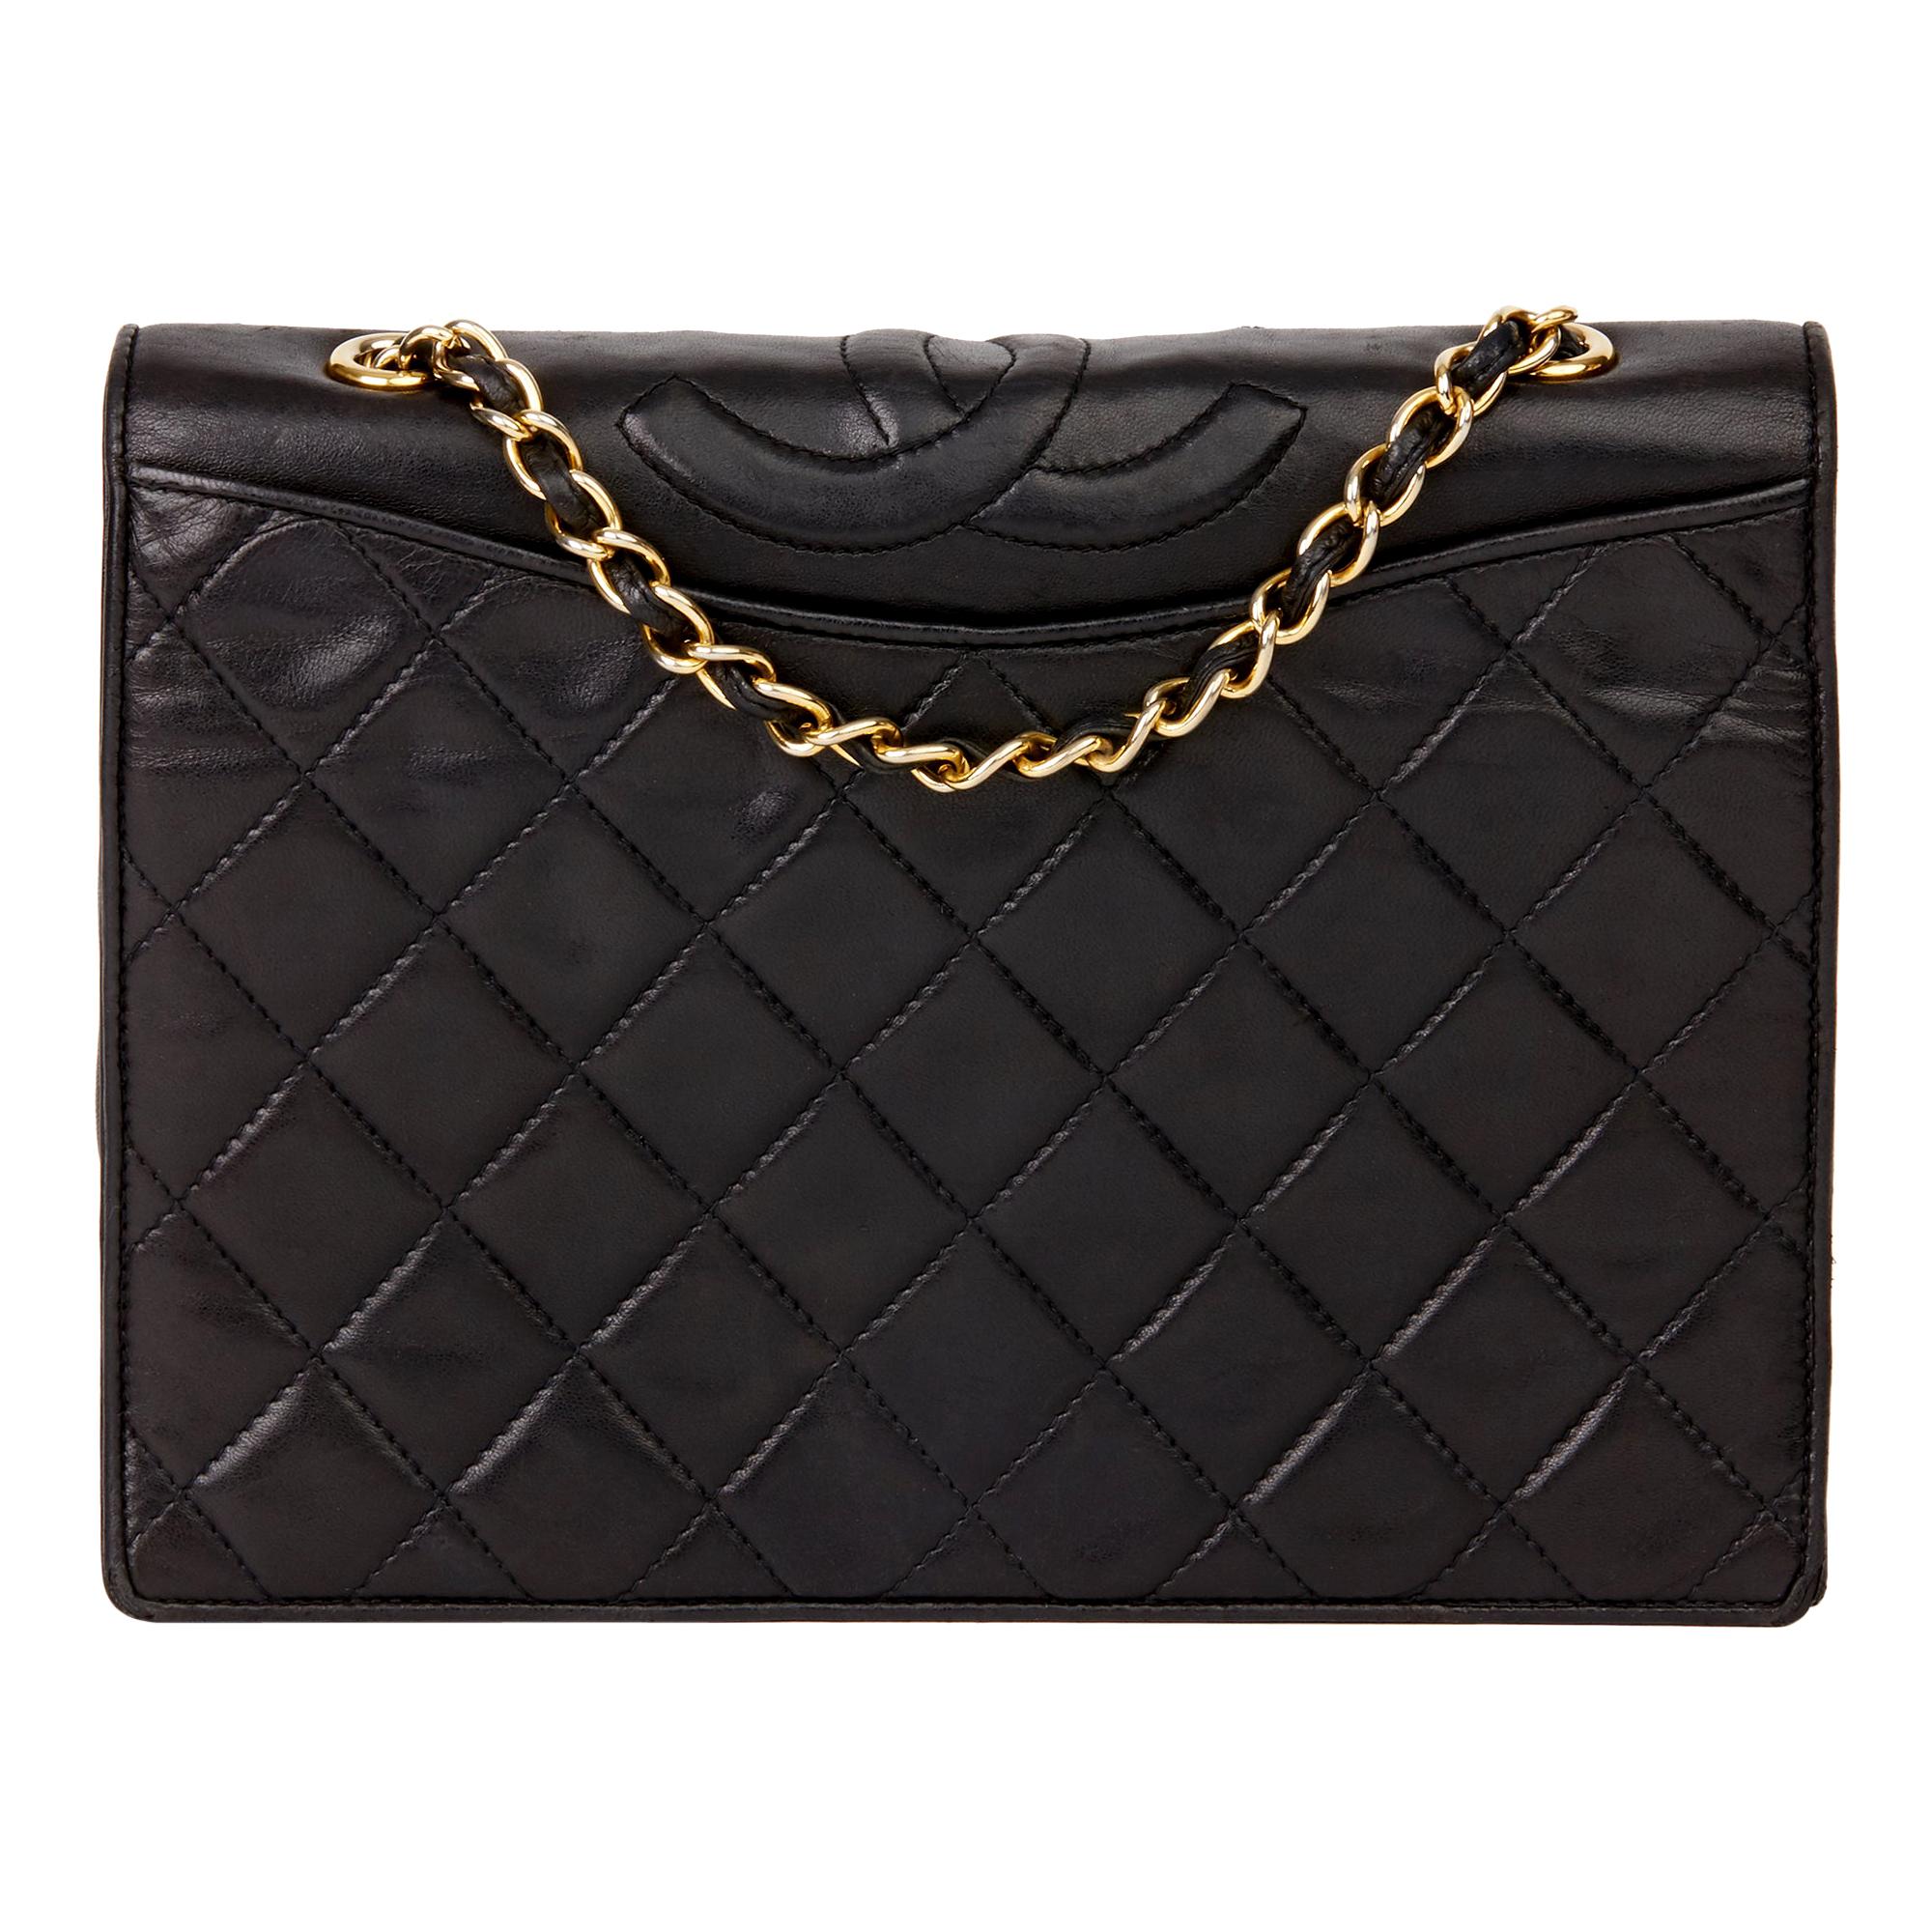 1990 Chanel Black Quilted Lambskin Vintage Timeless Single Flap Bag